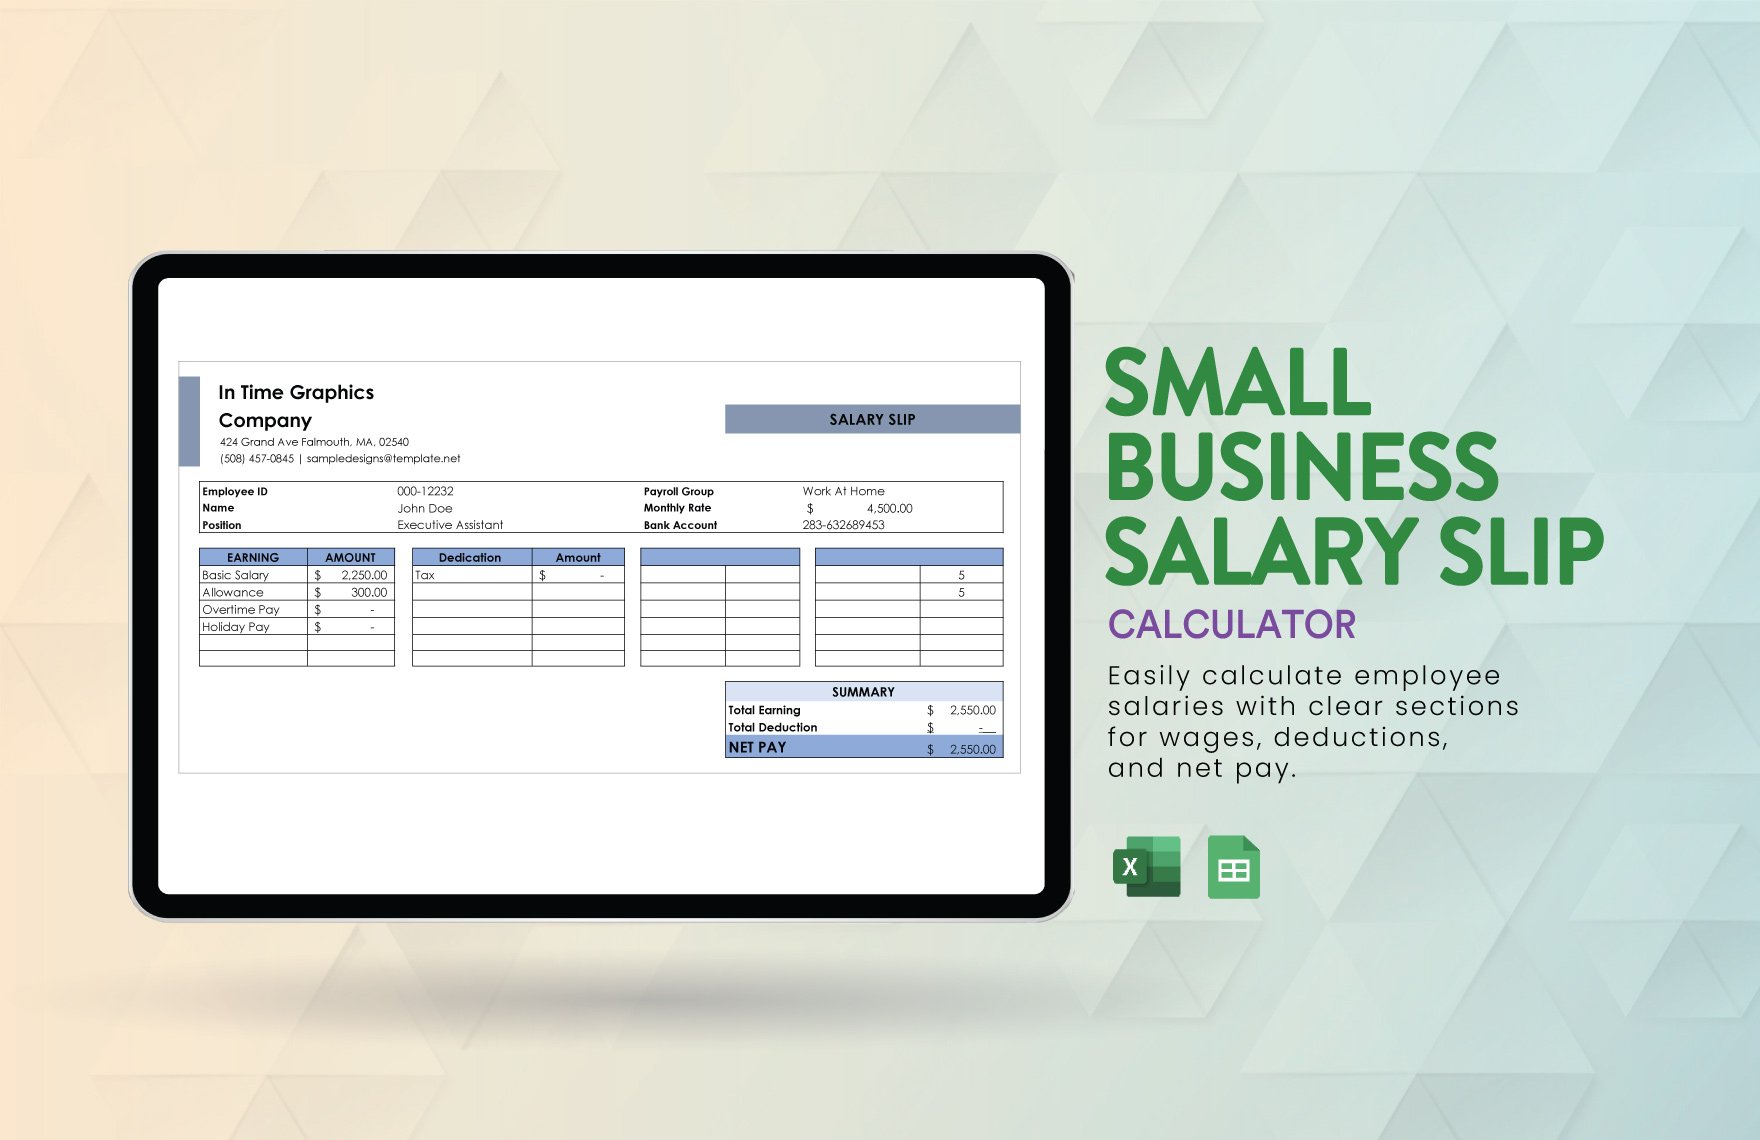 Small Business Salary Slip Calculator in Excel, Google Sheets